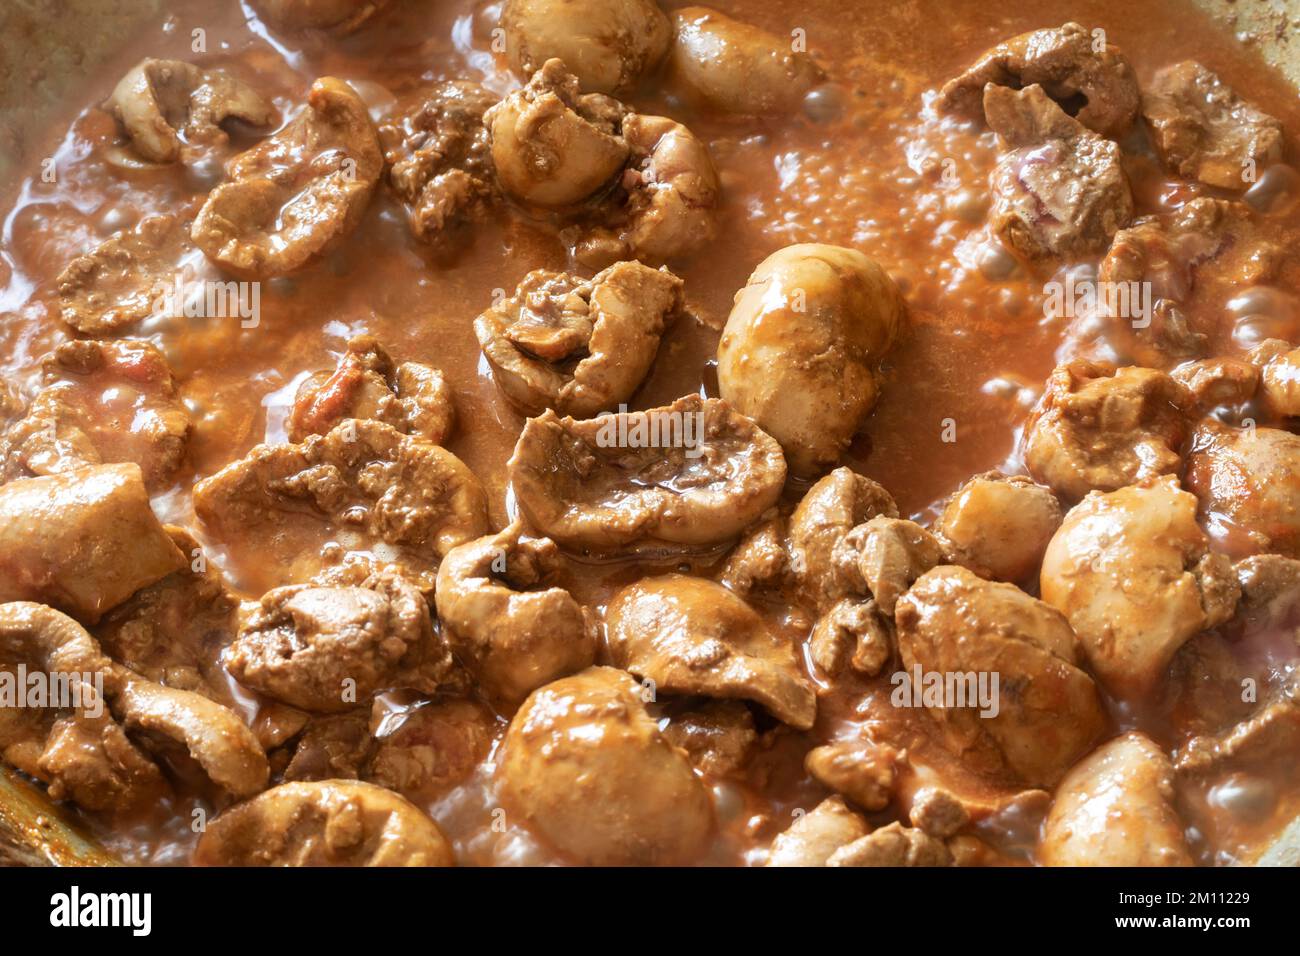 Cooking devilled kidneys, lambs kidneys in a spicy sauce . A Victorian breakfast dish Stock Photo